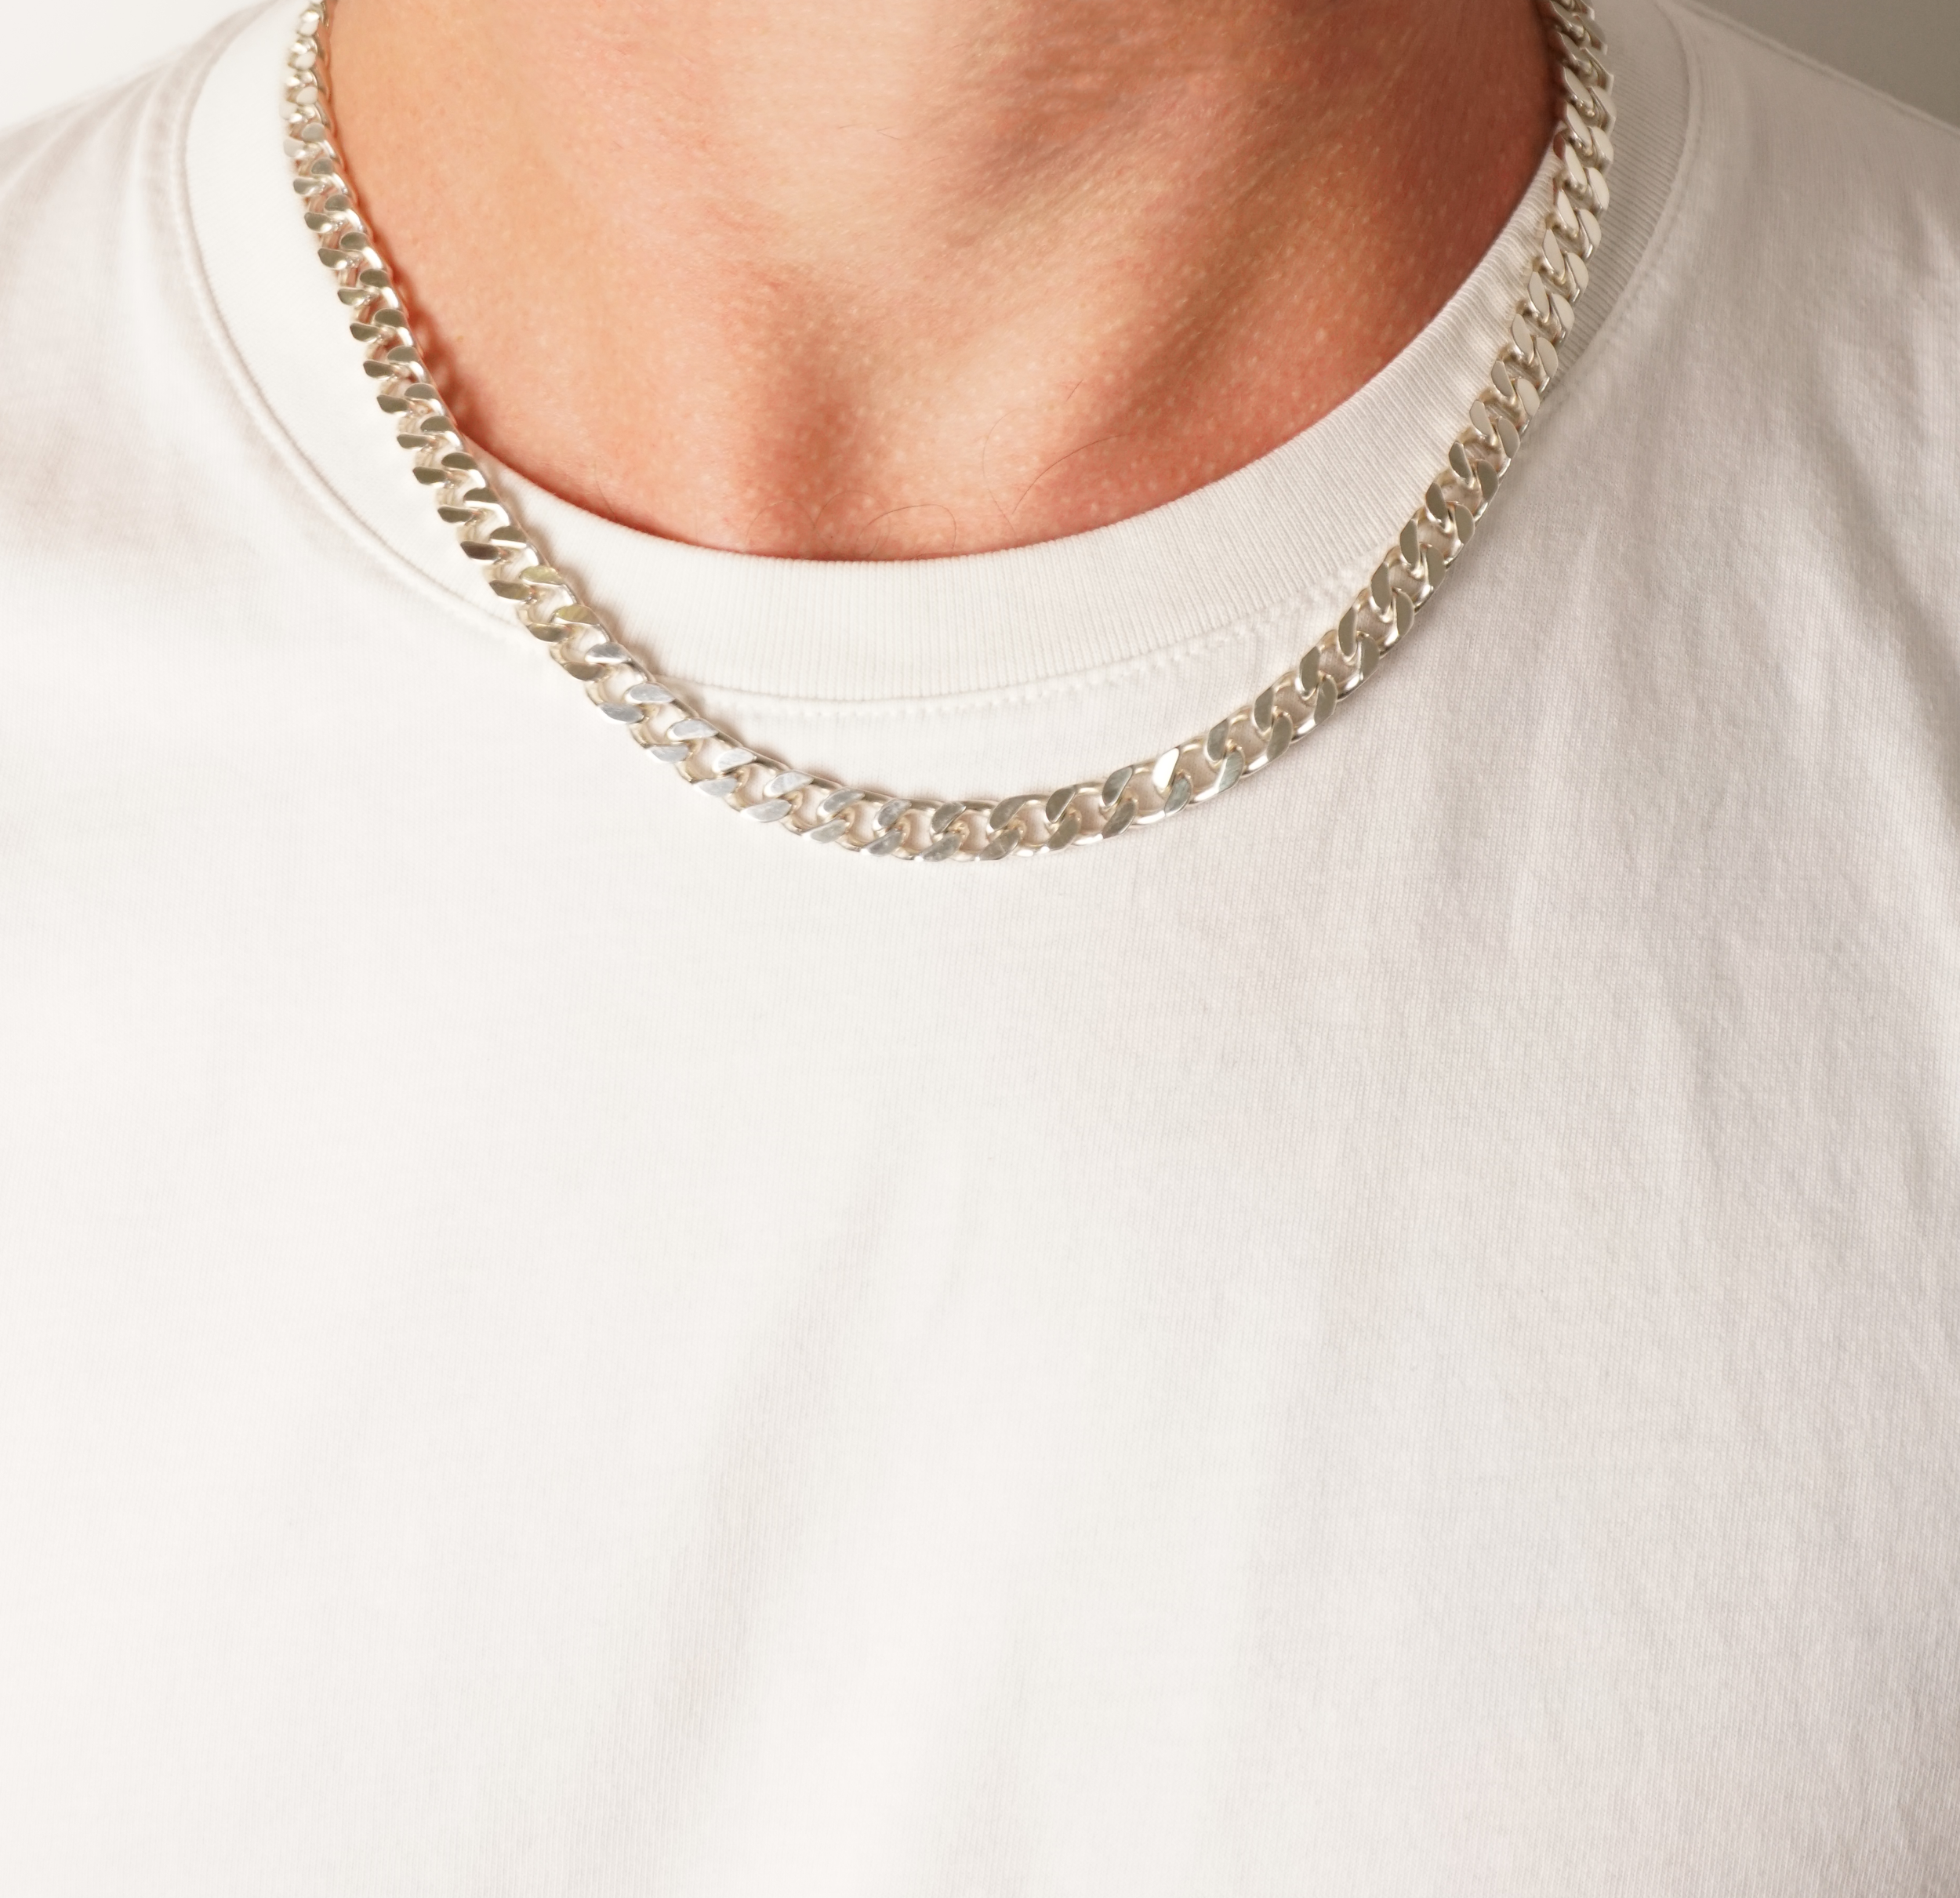 Solid Curb Chain Necklace 6mm Stainless Steel 20